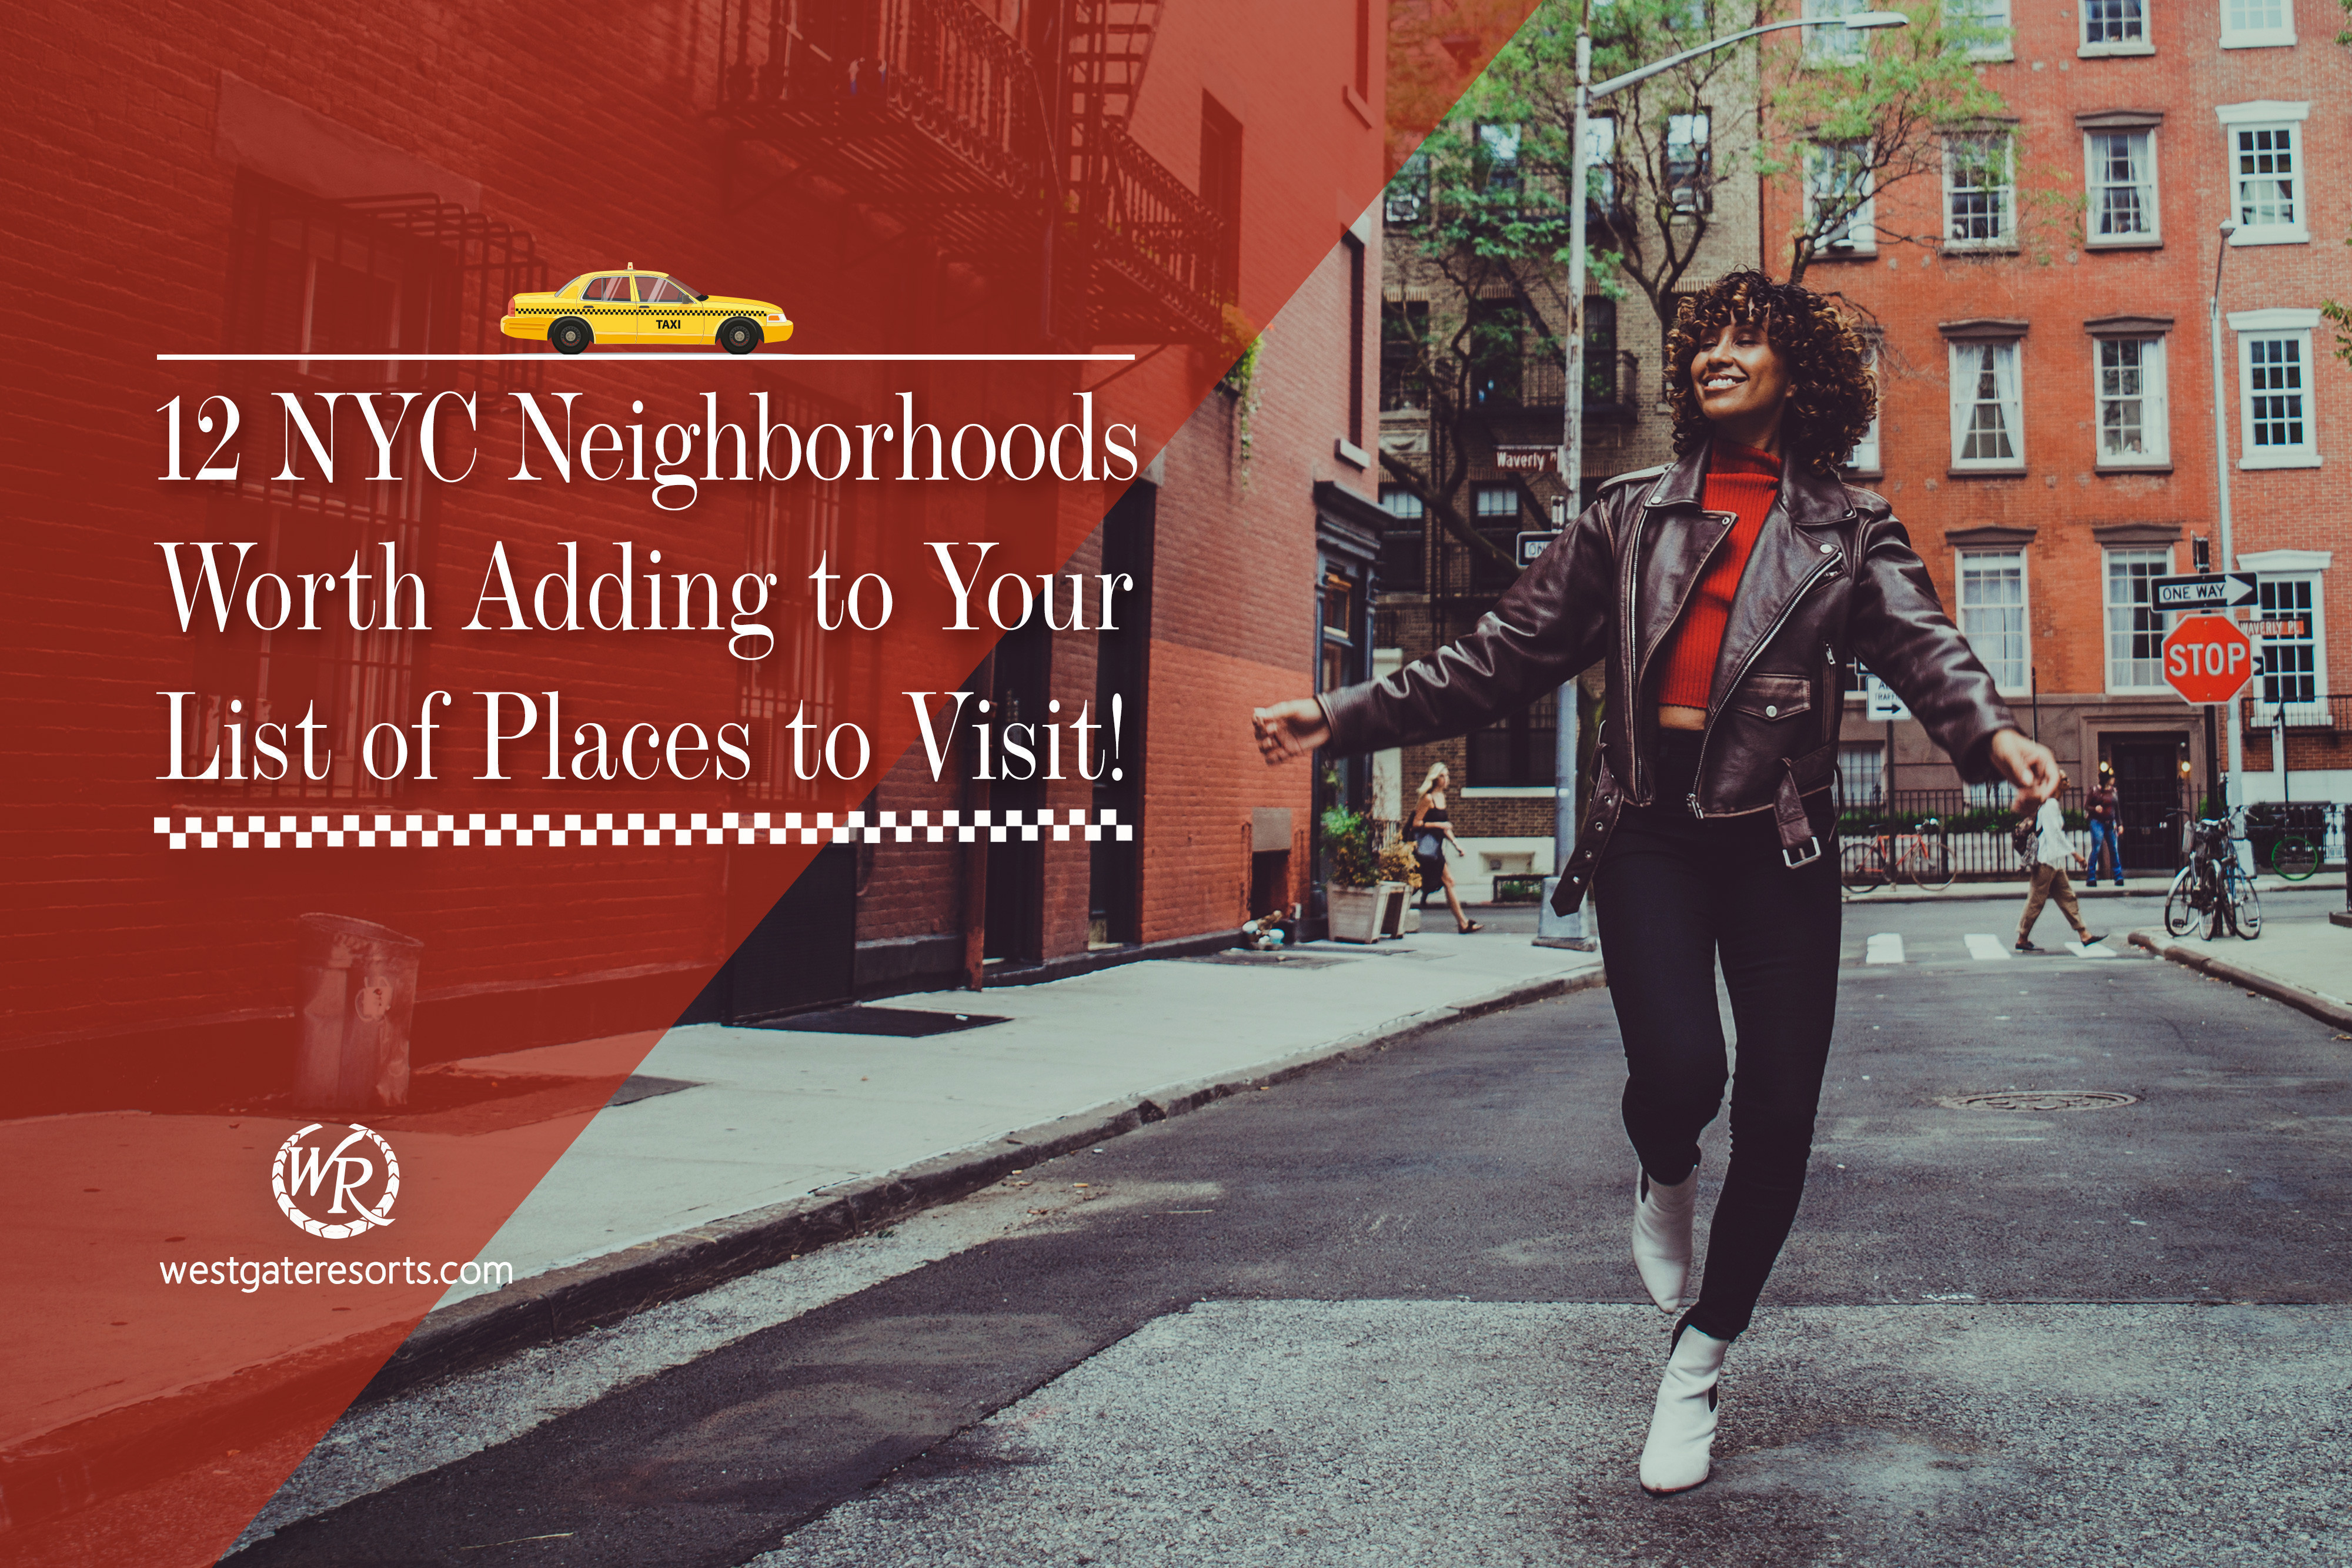 12 NYC Neighborhoods Worth Adding to Your List of Places to Visit!